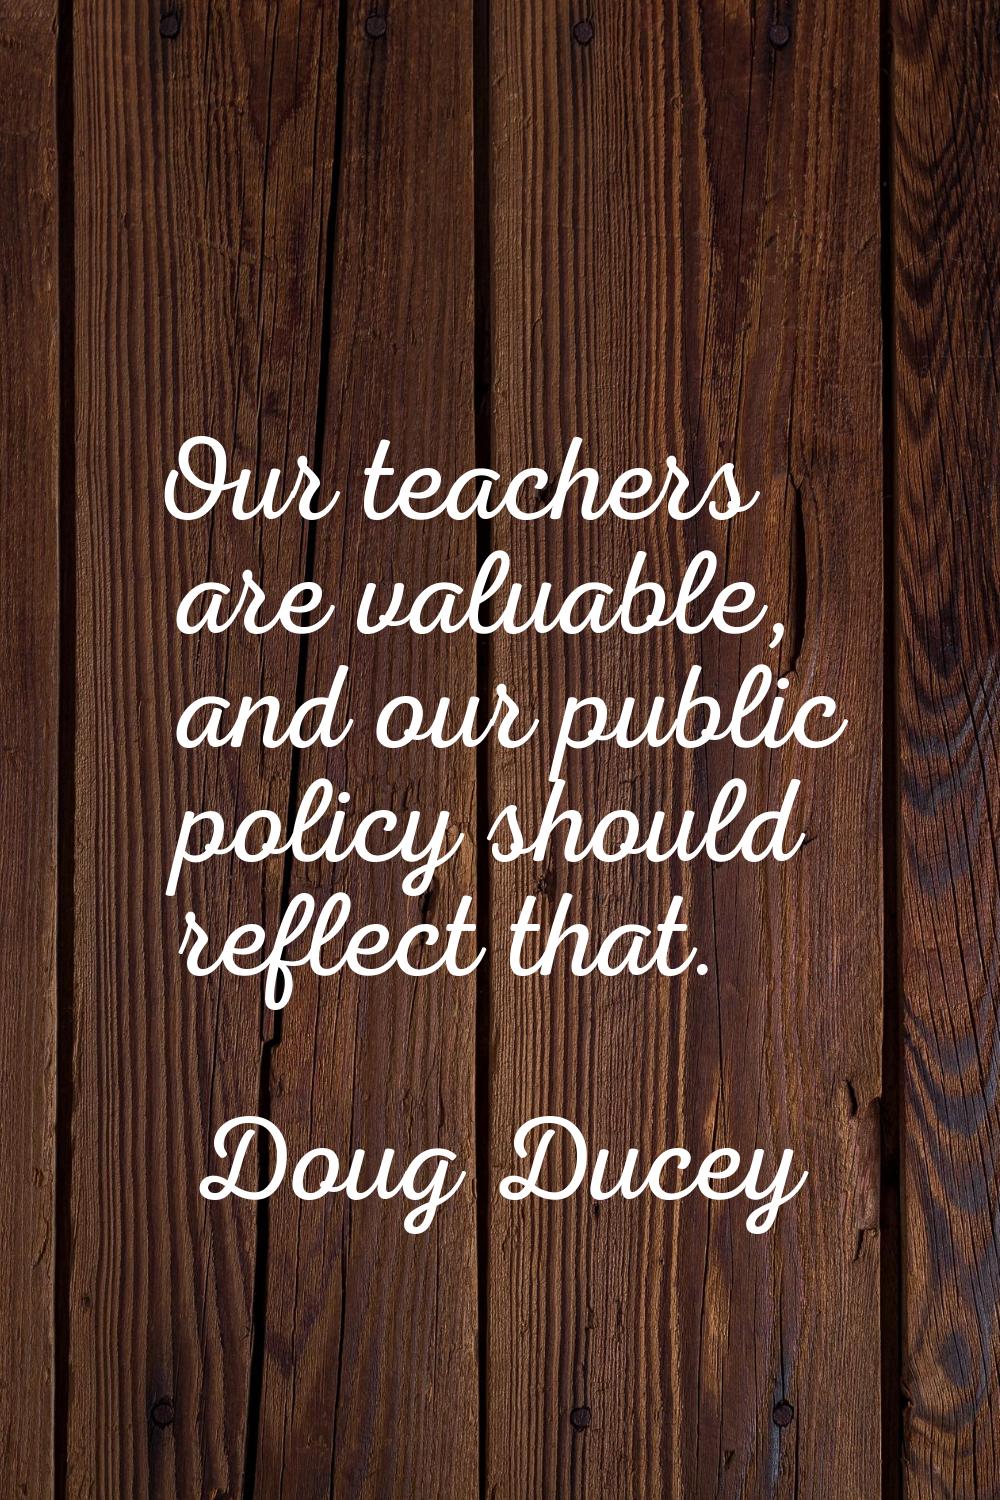 Our teachers are valuable, and our public policy should reflect that.